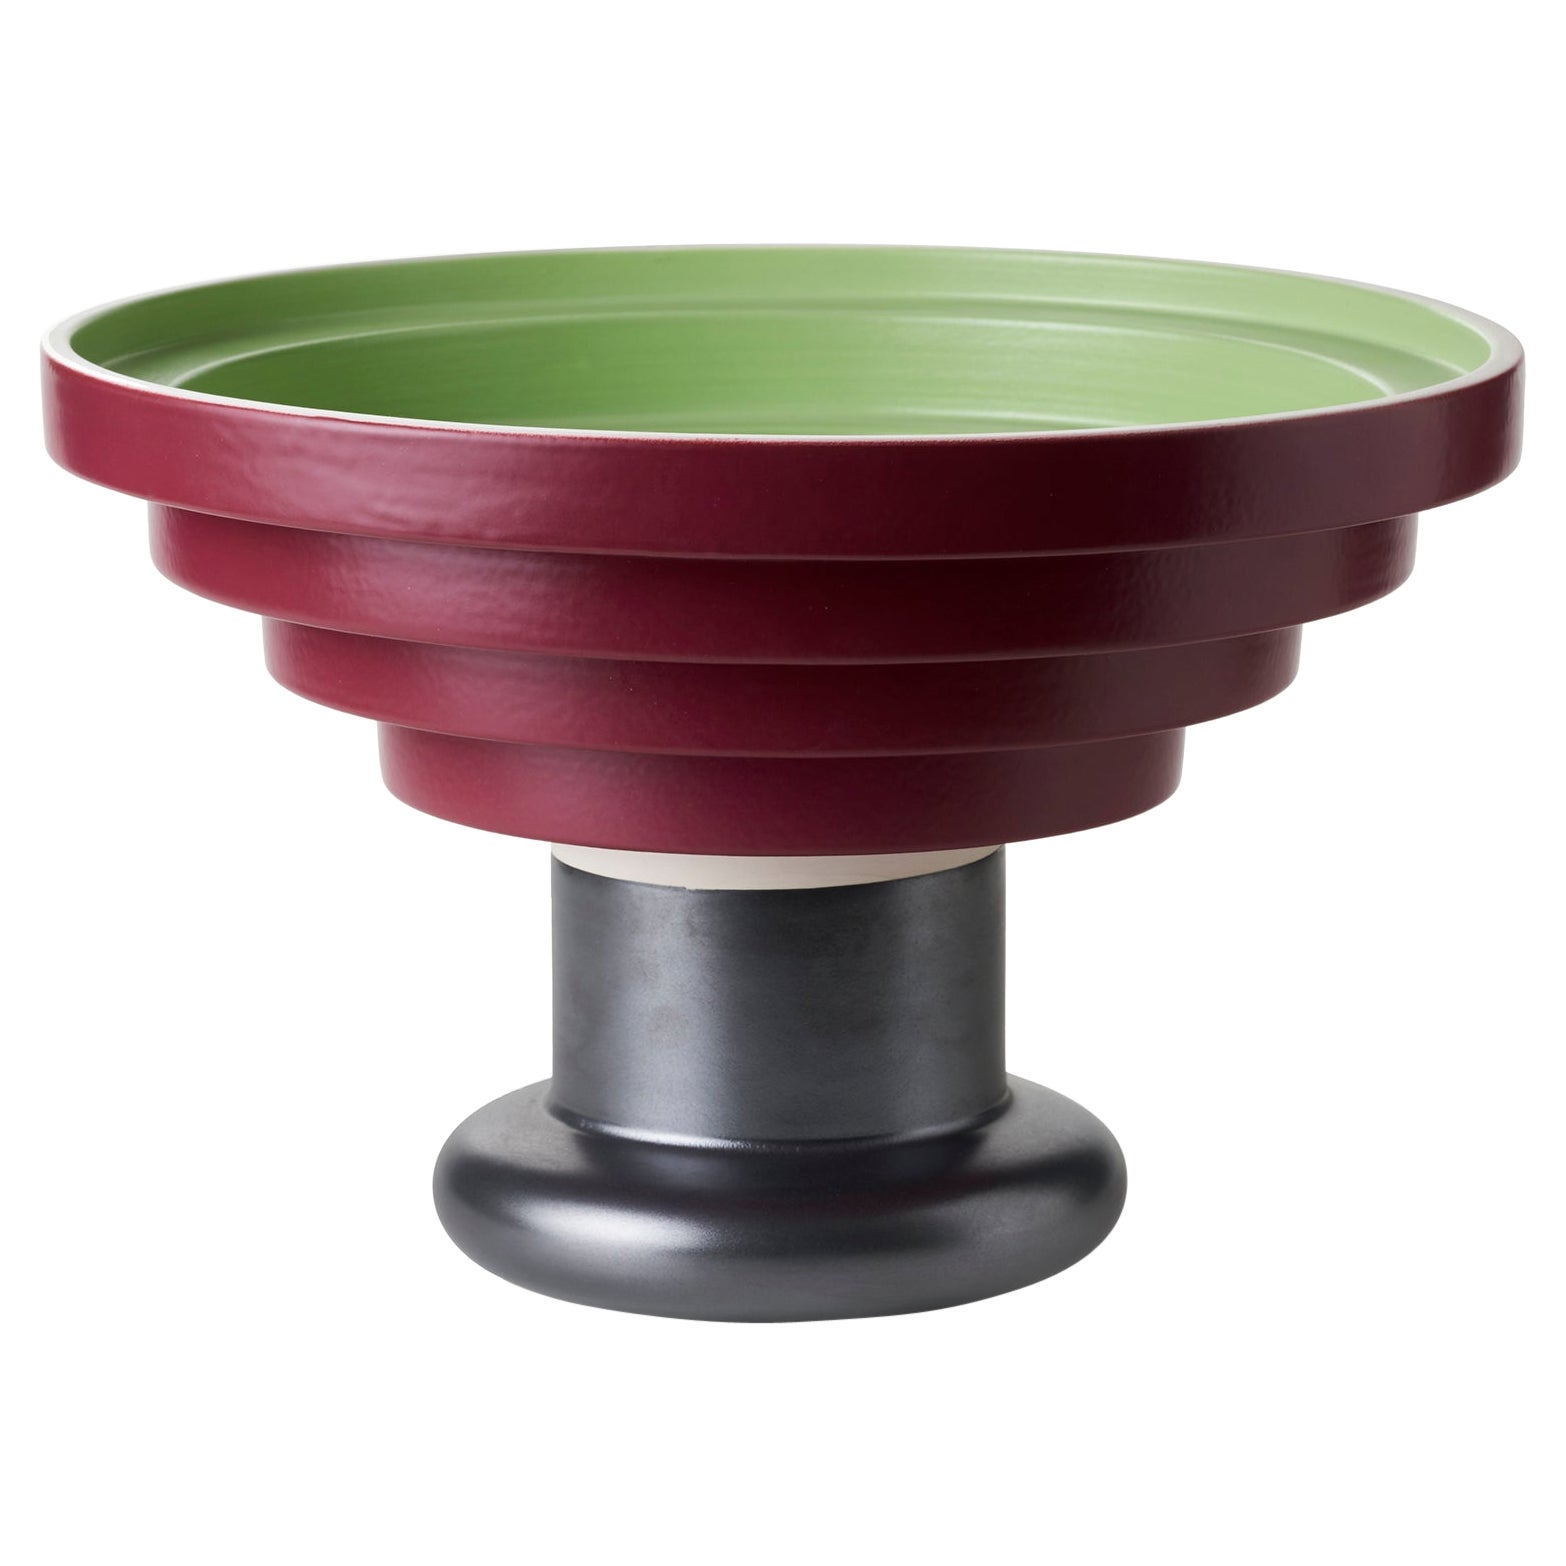 Alzata Verde Rosso by Ettore Sottsass